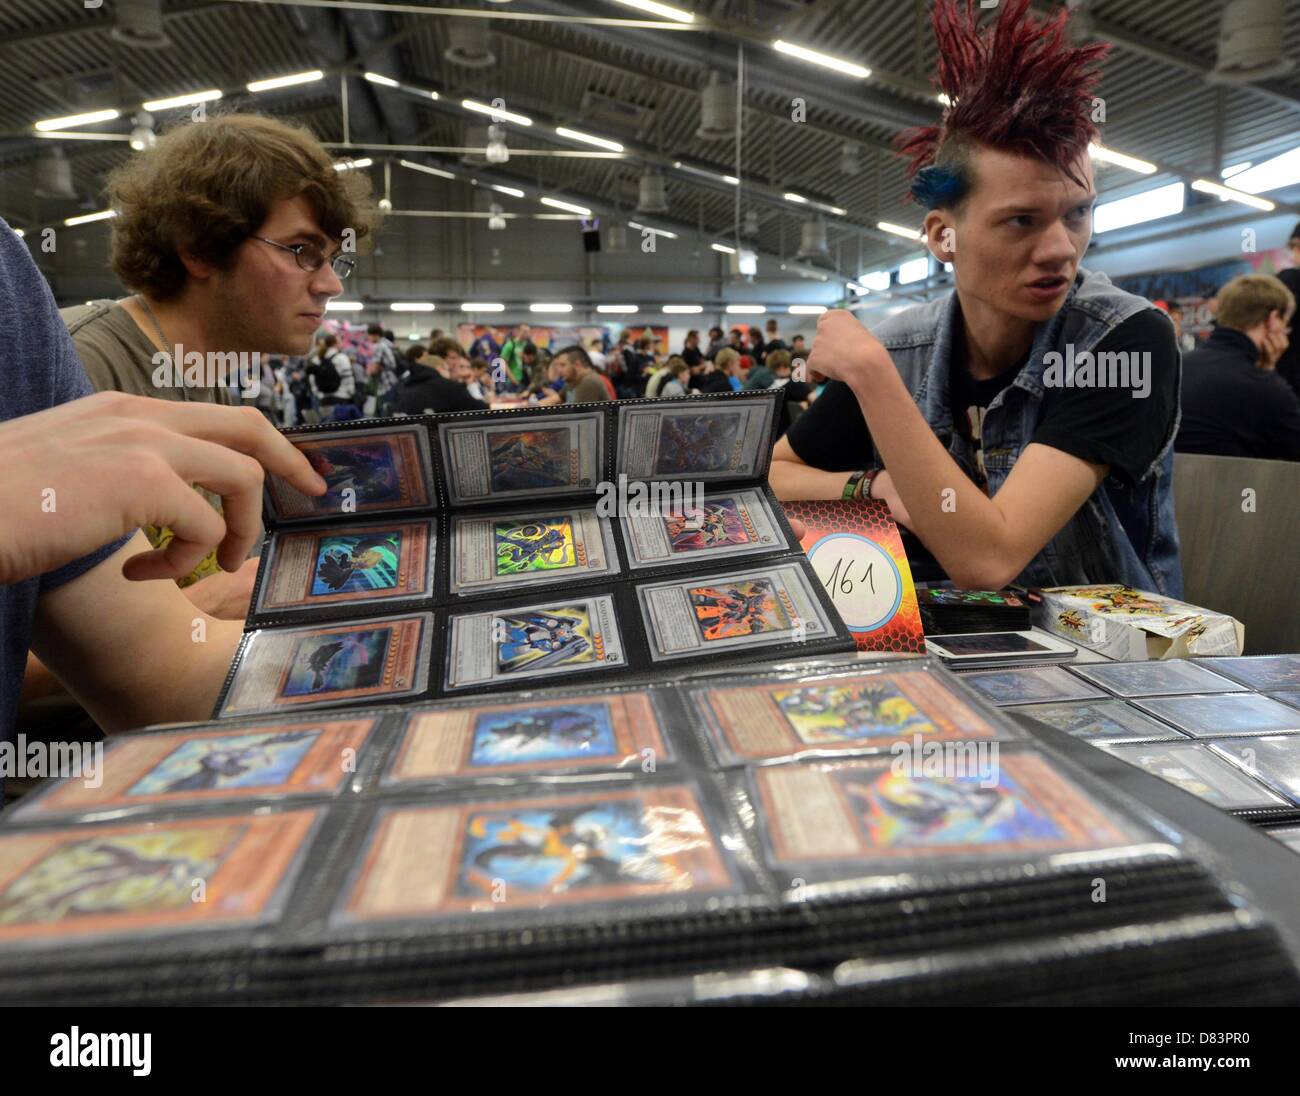 Participants of the German Yu-Gi-Oh! Trading Card Game Championships exchange strategy cards in Schkeuditz, Germany, 18 May 2013. More than 800 players competed against each other to win the title of German champion of the Japanese card game. The best 32 players achieved a qualification for the European Championships at the end of June i n Frankfurt (Main). Photo: Hendrik Schmidt/dpa Stock Photo